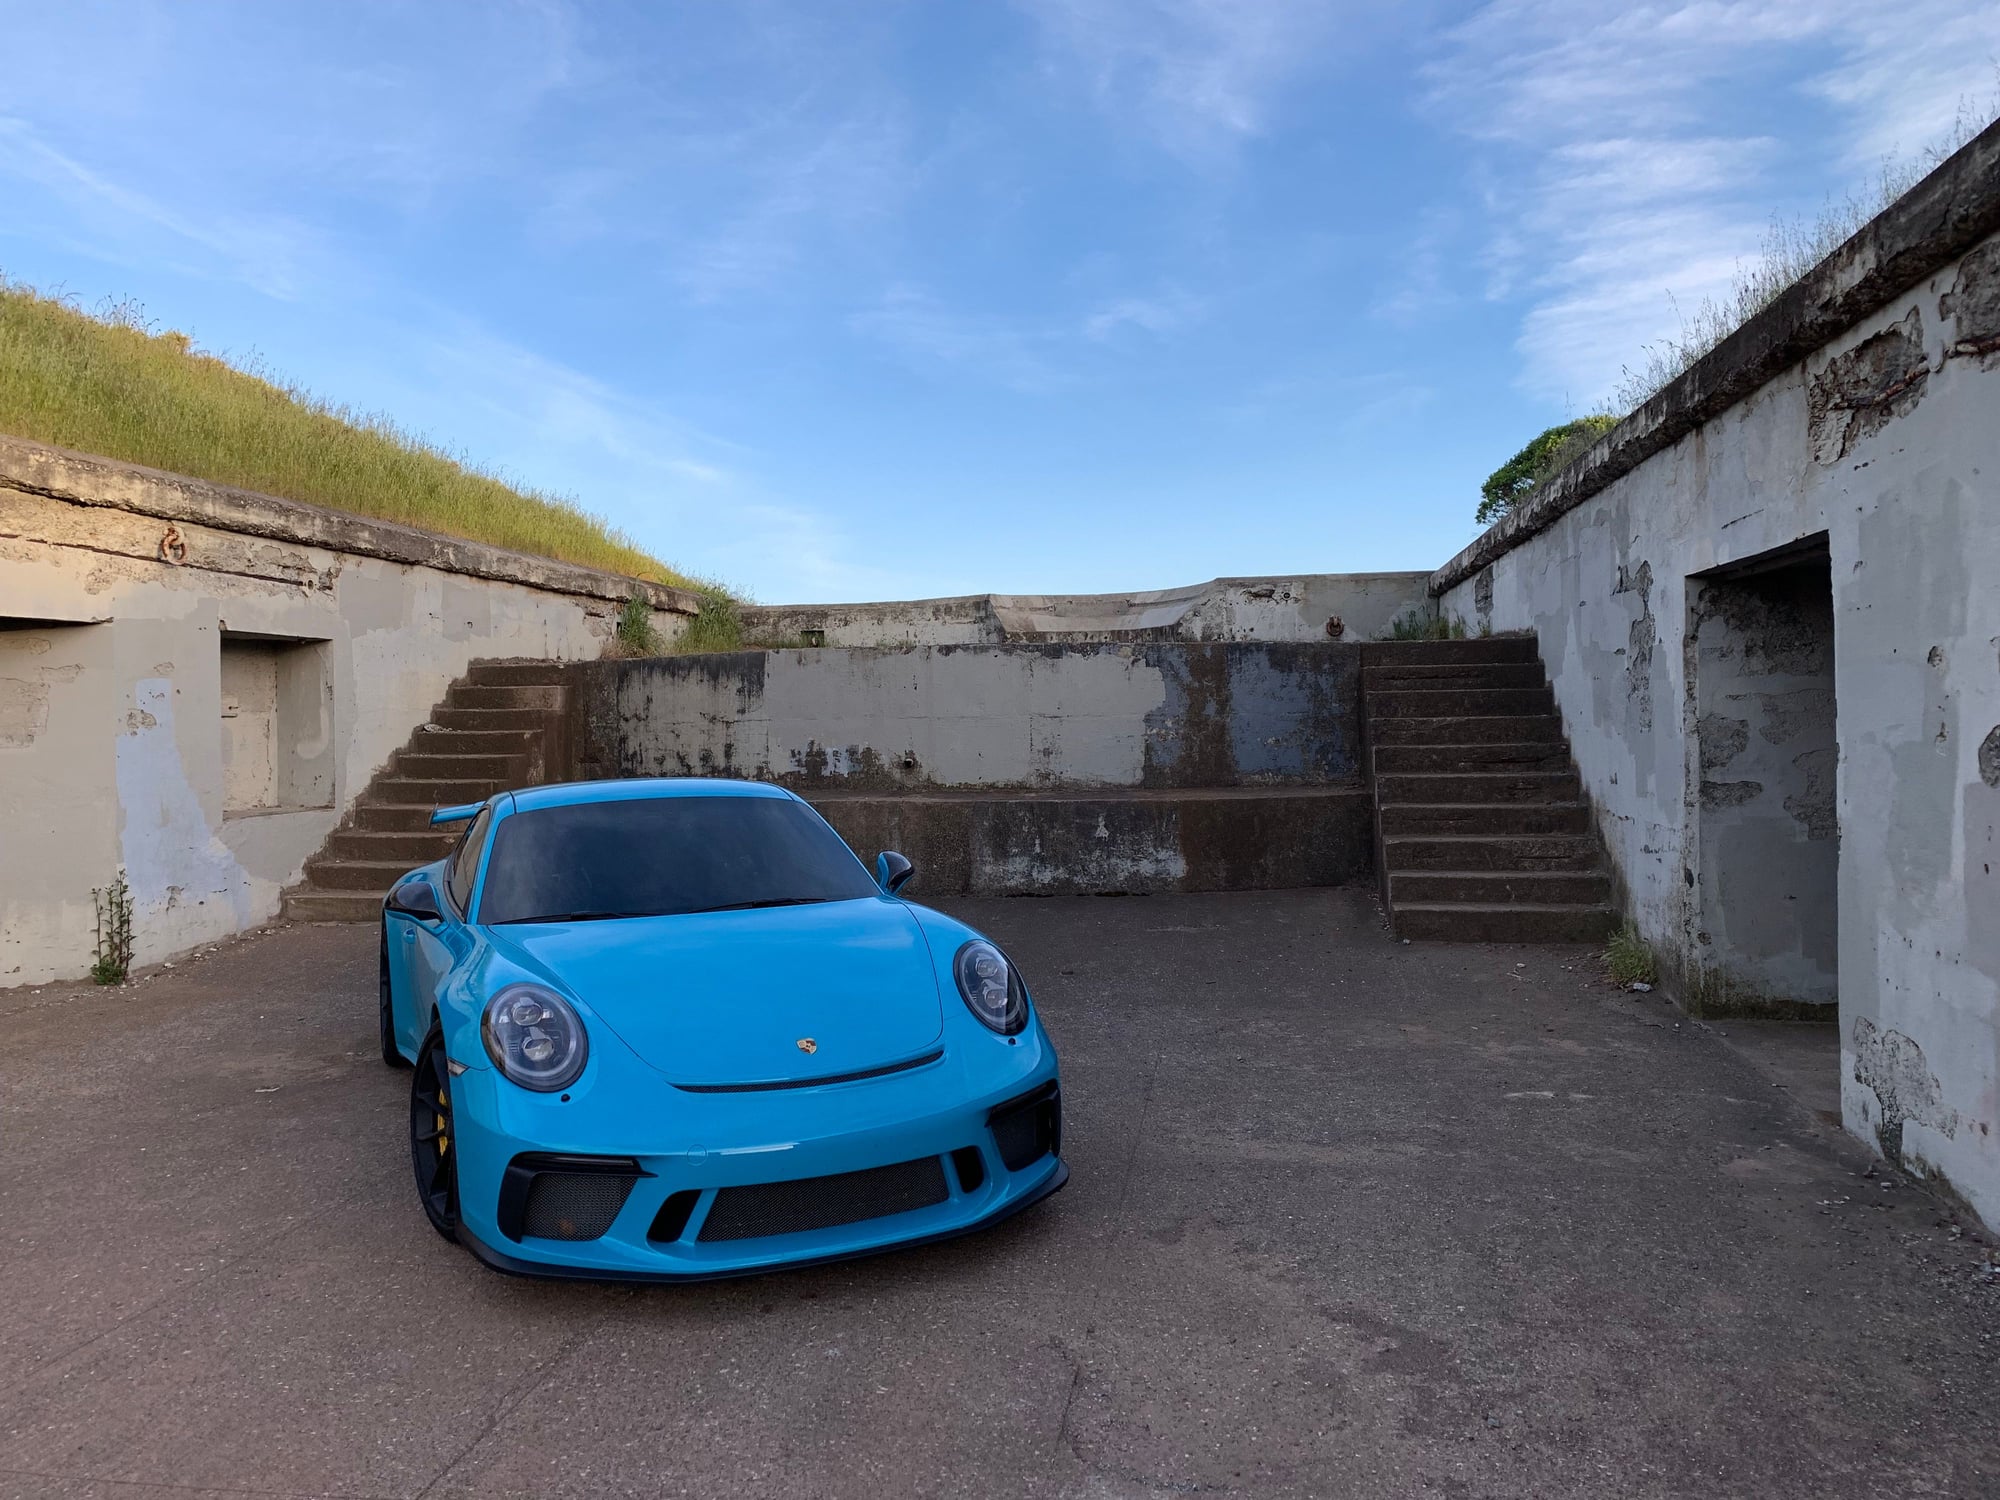 2018 Porsche GT3 - Miami Blue - Well Optioned - Manual - GT3 - Used - VIN WP0AC2A98JS174280 - 9,100 Miles - 6 cyl - 2WD - Manual - Coupe - Blue - San Francisco, CA 94110, United States